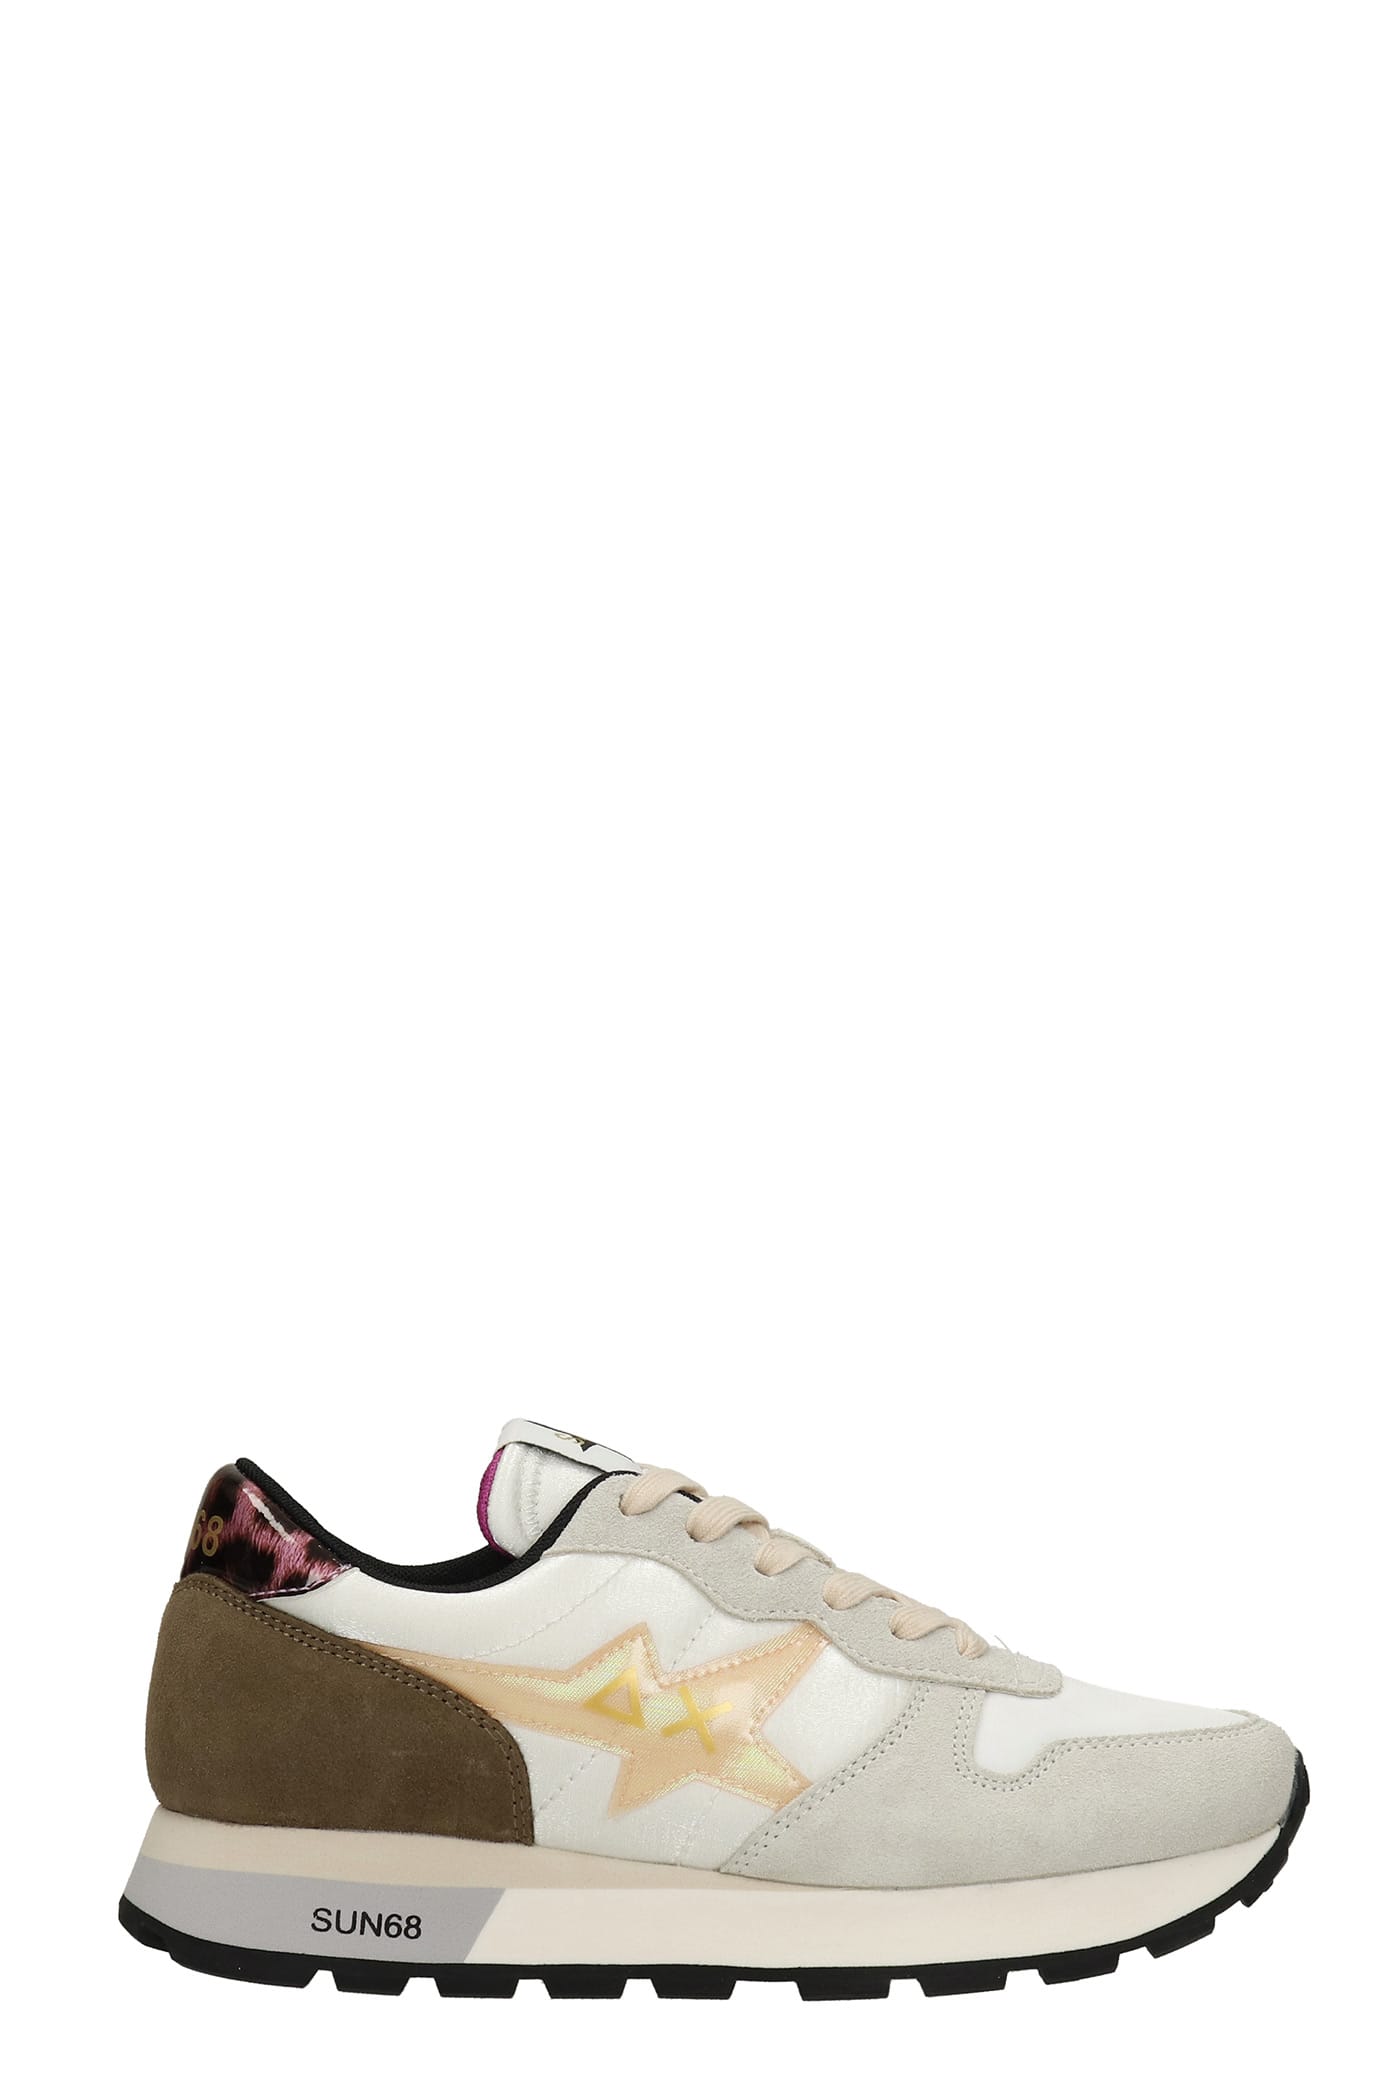 Sun 68 Stargirl Sneakers In White Suede And Fabric